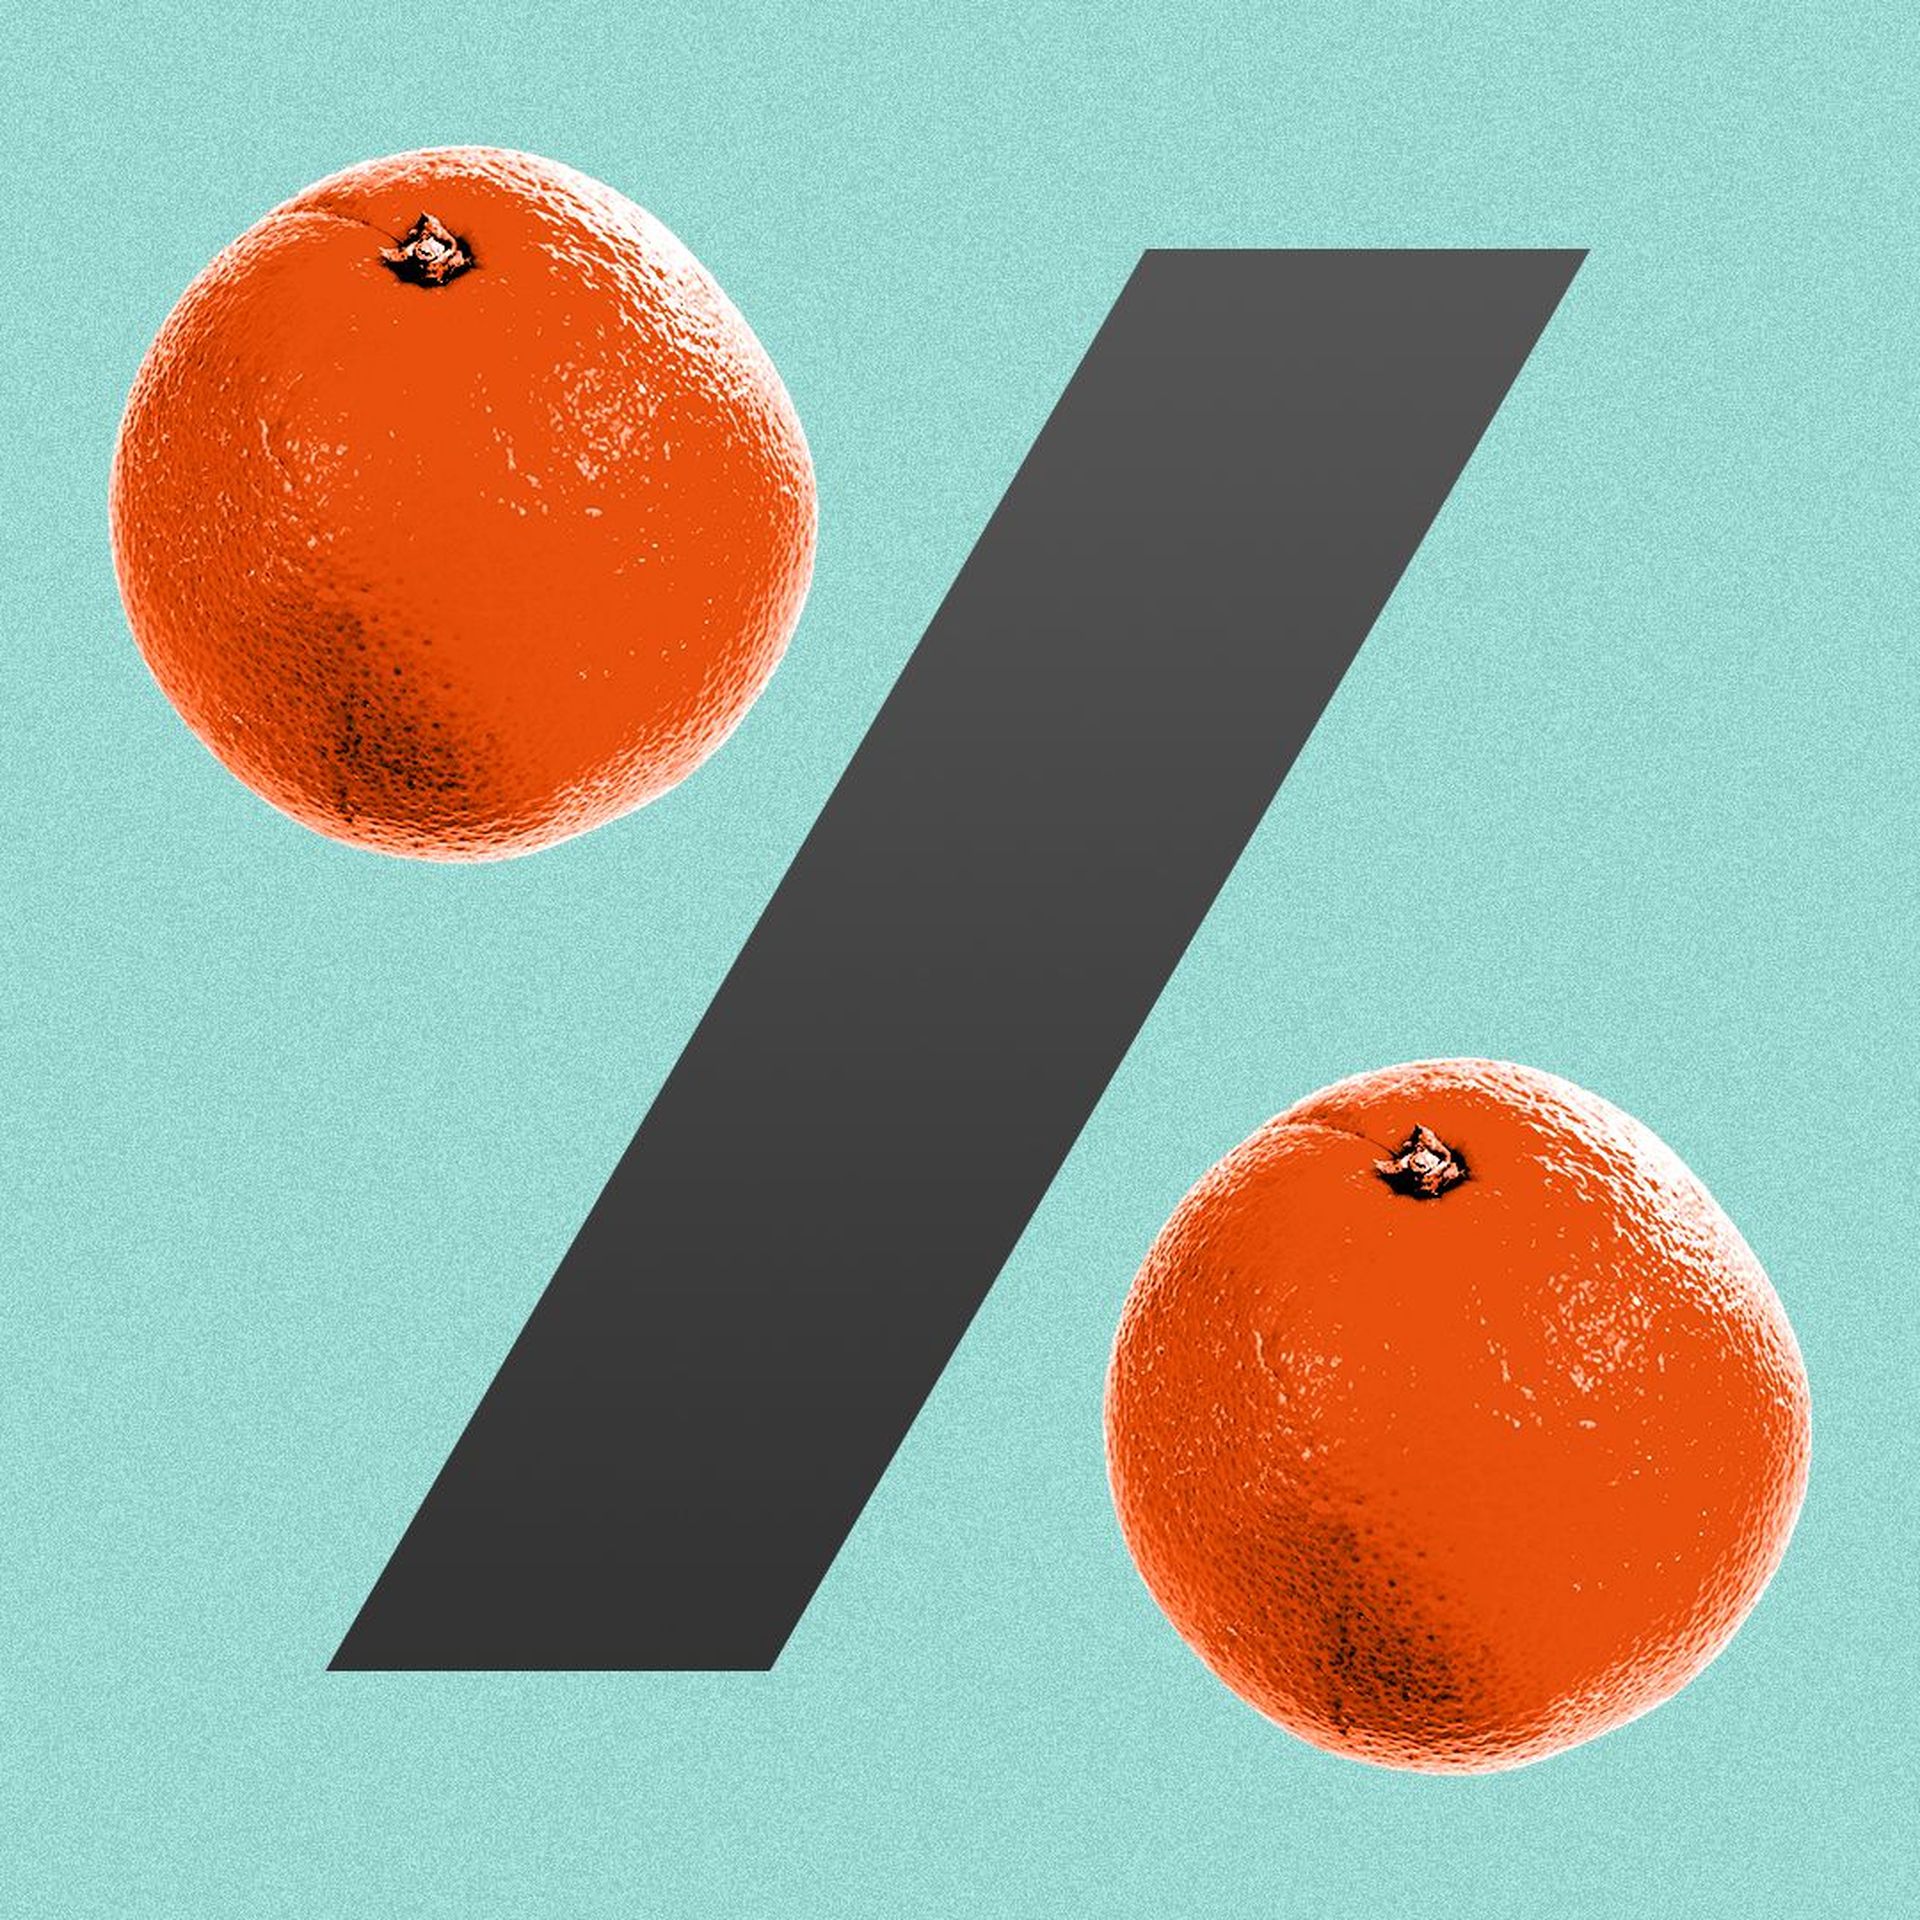 Illustration of a percent sign with oranges instead of circles. 